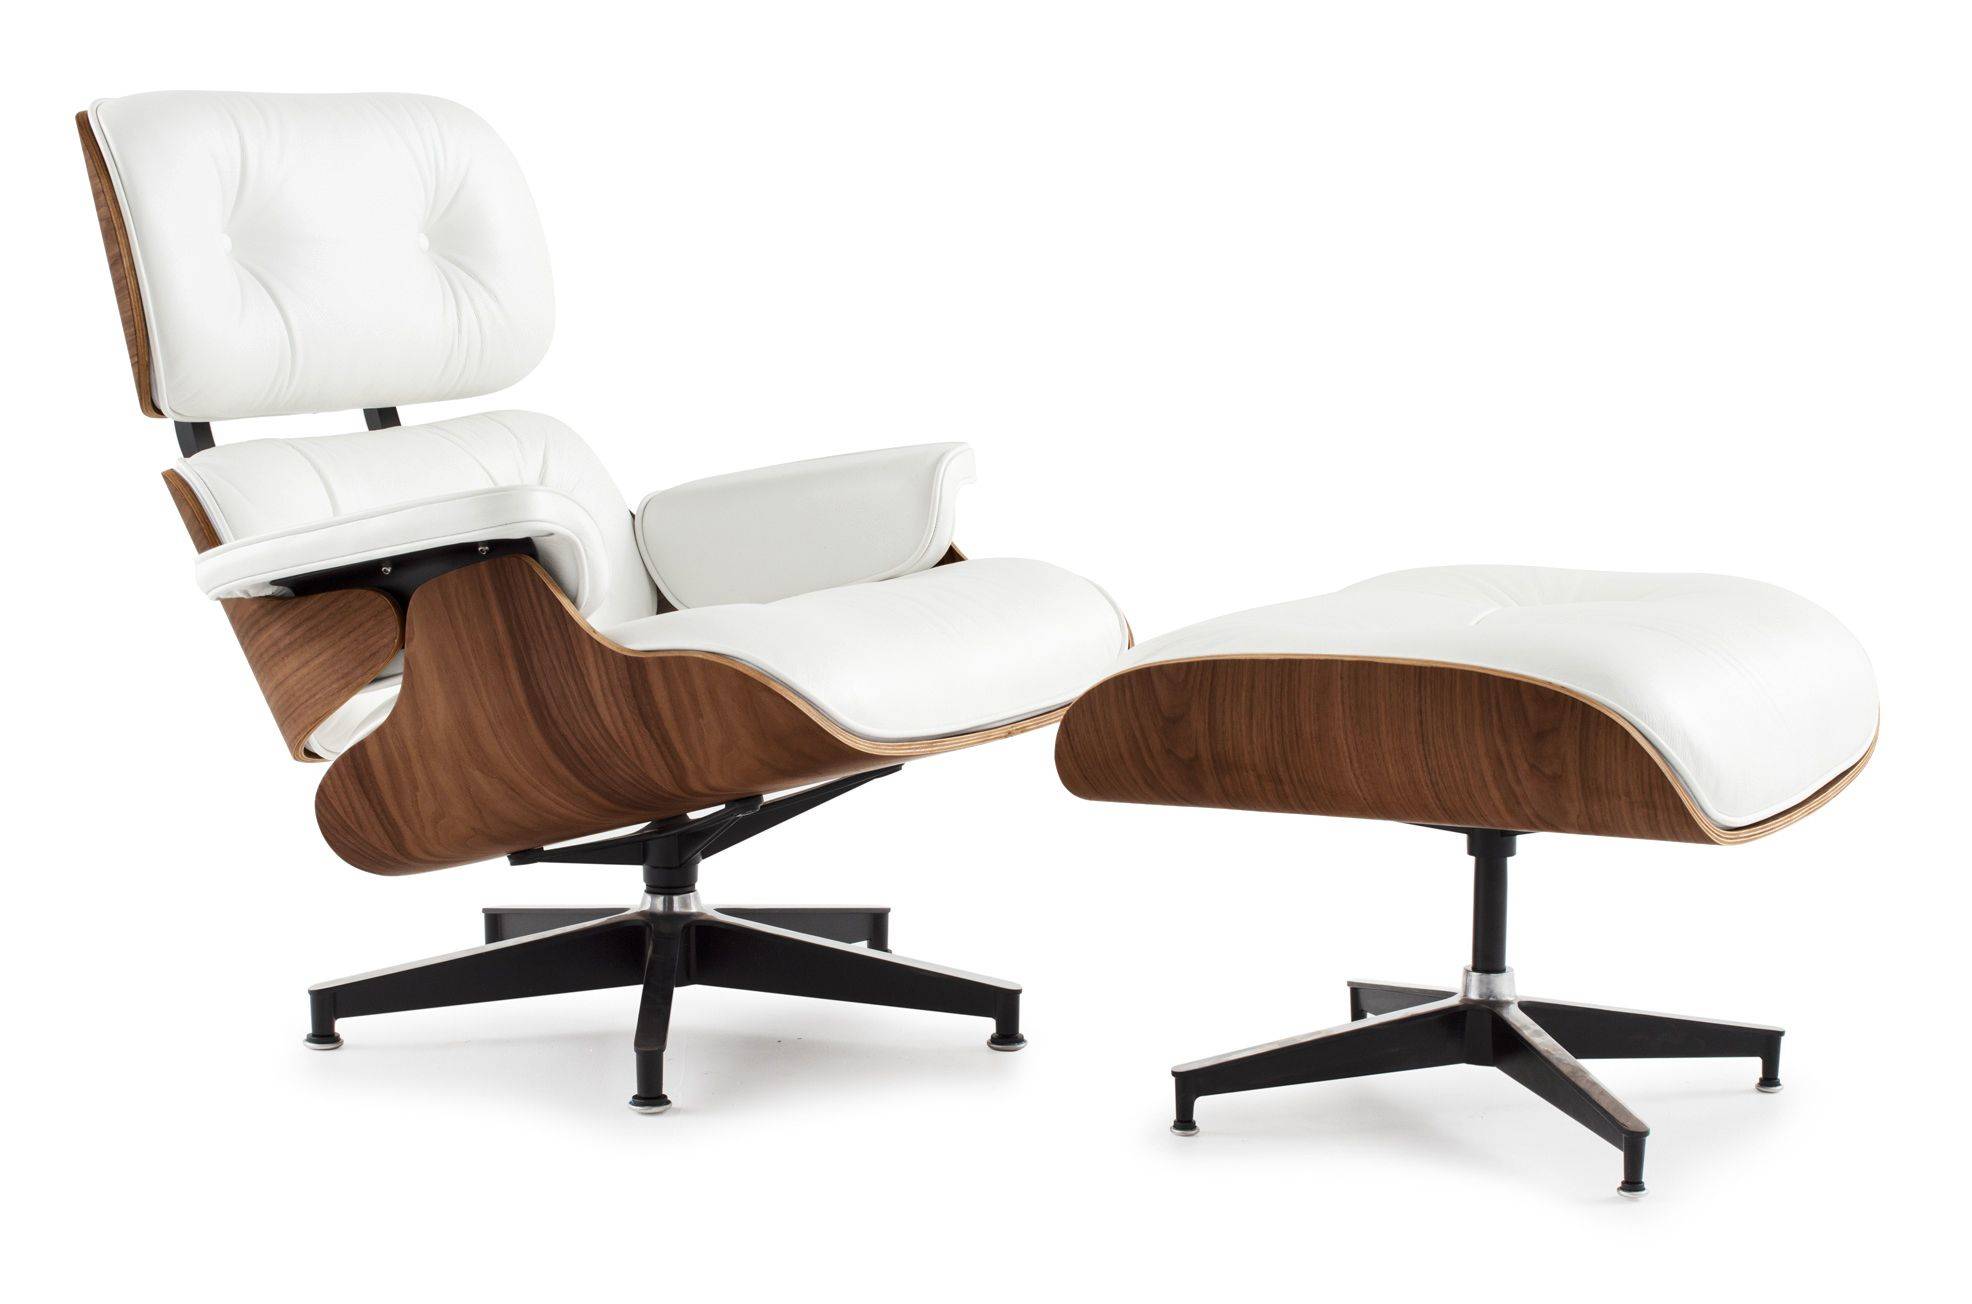 eames-charles-and-rayeames-lounge-chair-ottoman_45